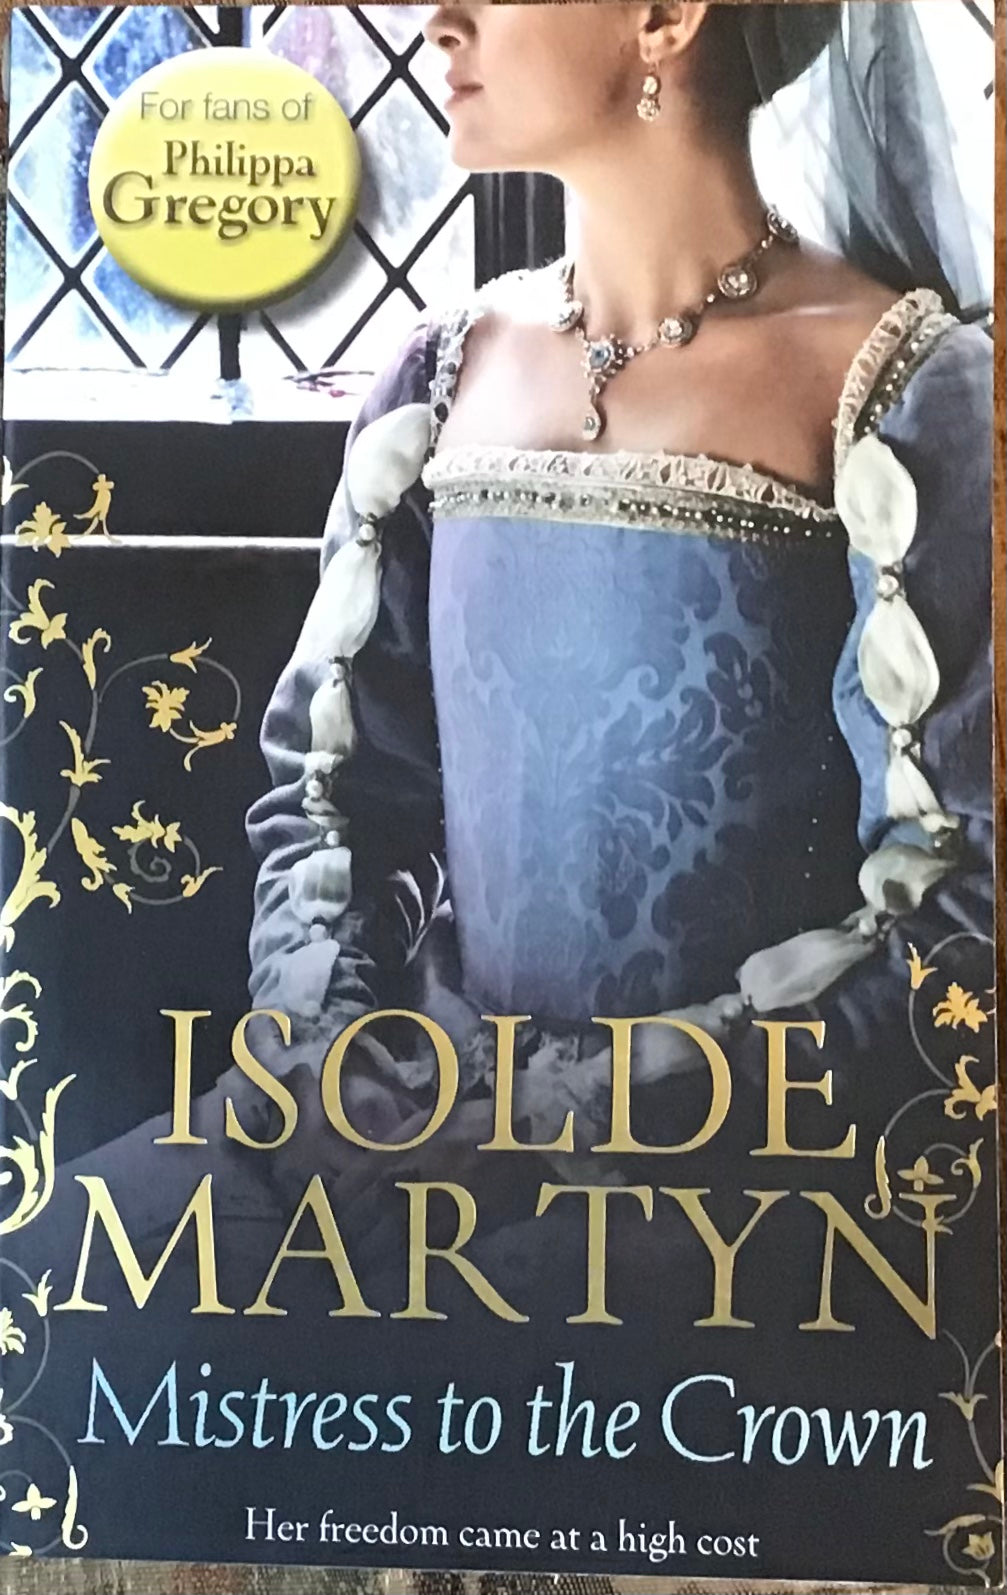 Mistress To The Crown, Isolde Martyn